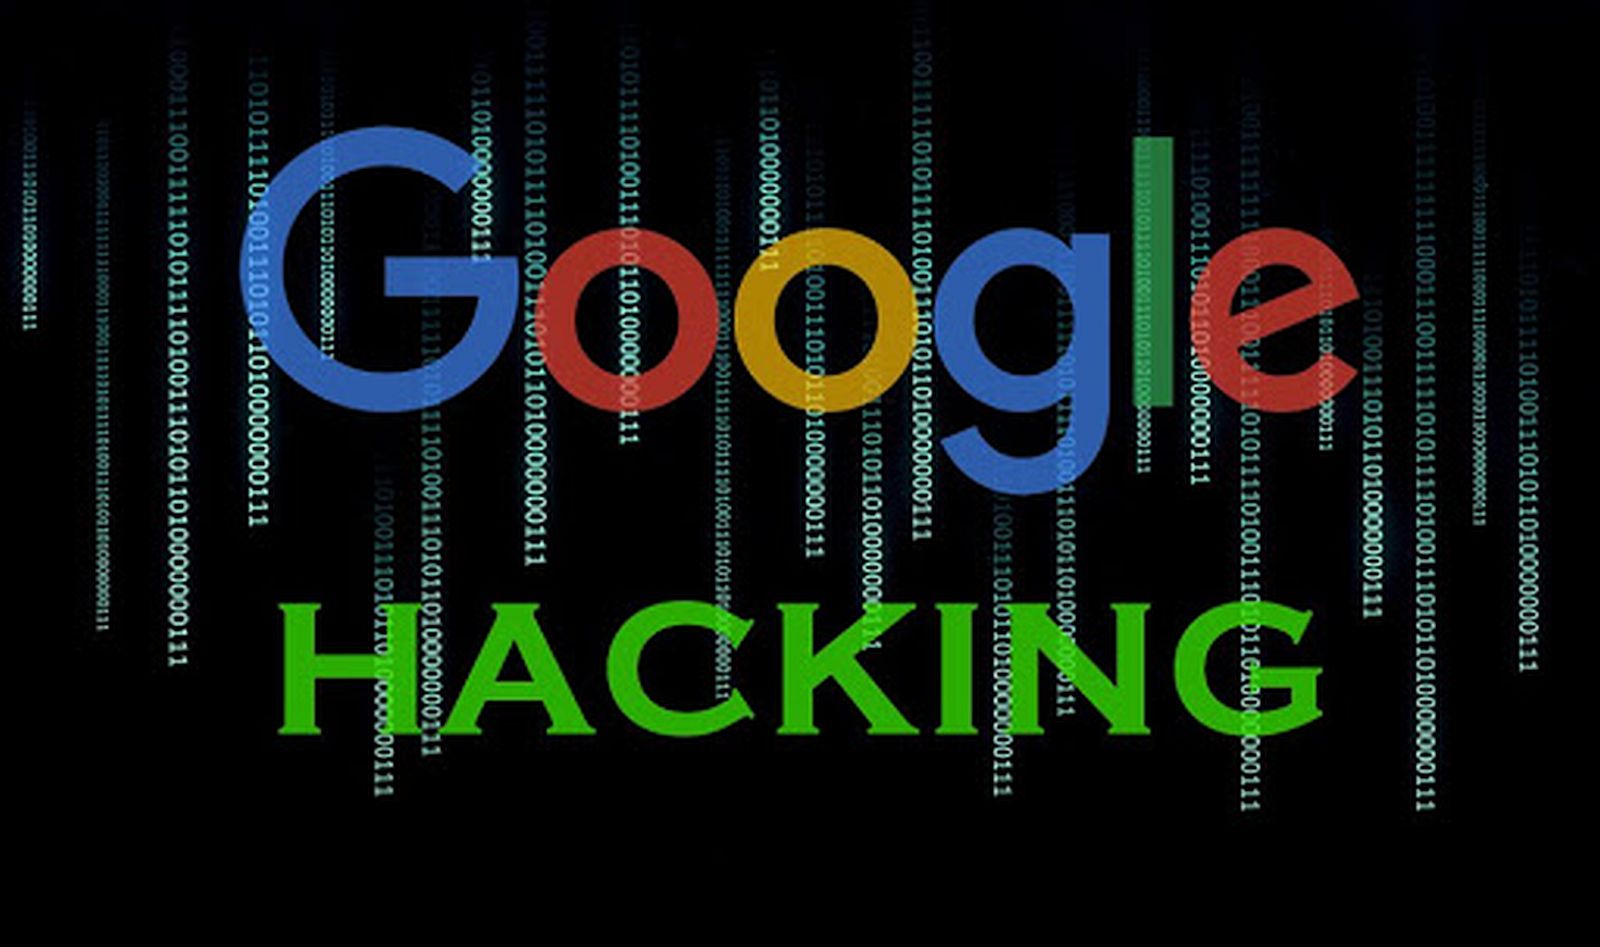 Yes, hackers and other security minded people also use Google!